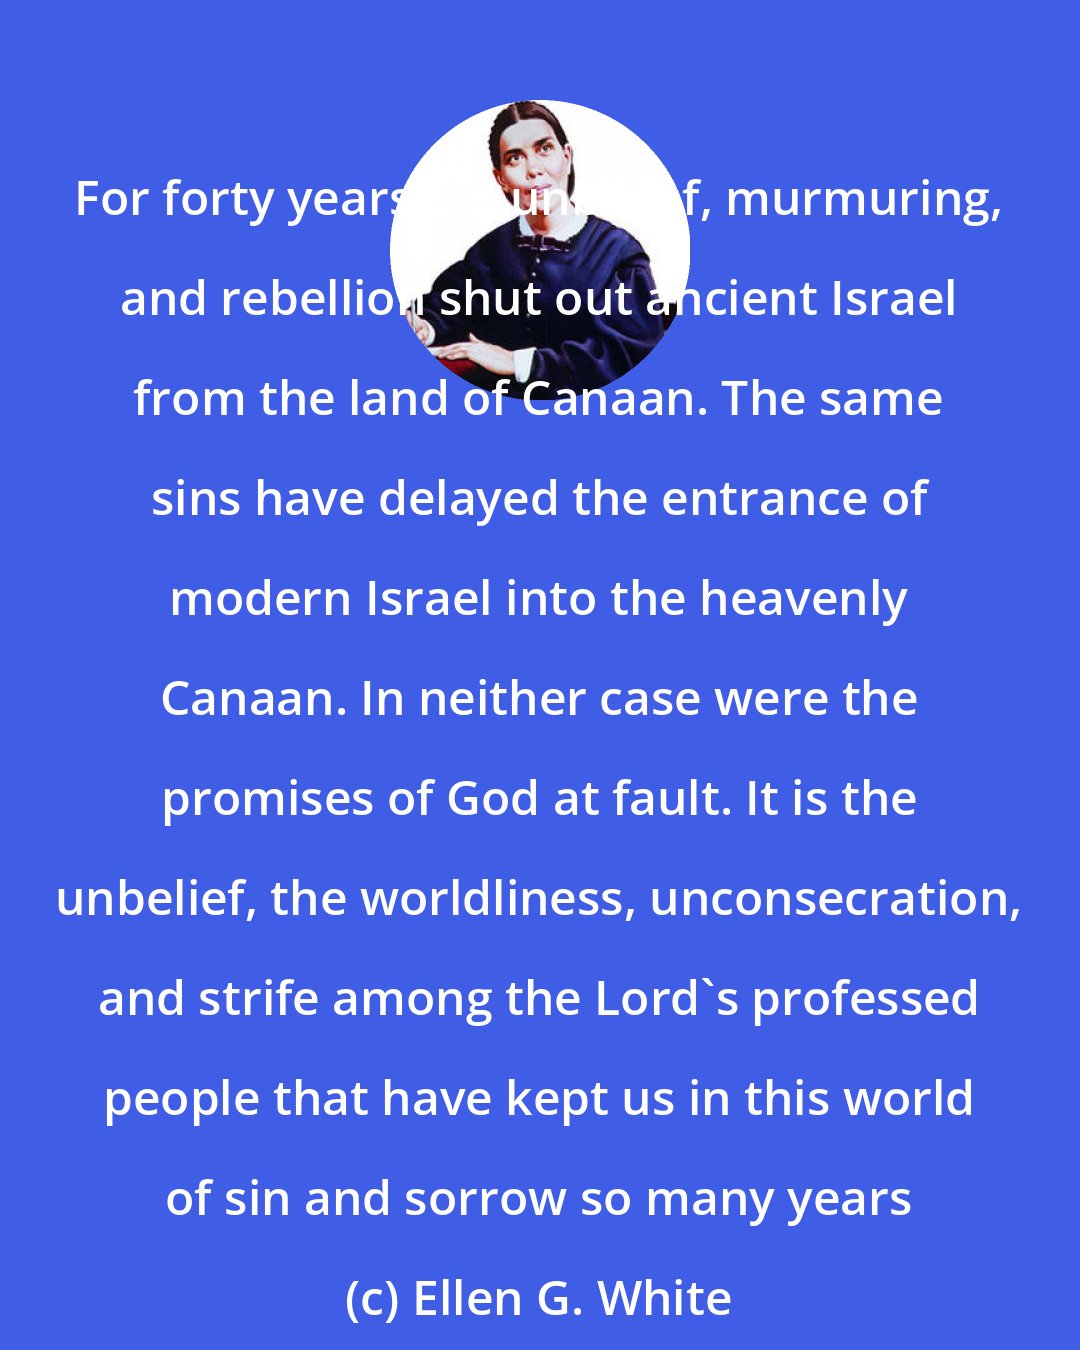 Ellen G. White: For forty years did unbelief, murmuring, and rebellion shut out ancient Israel from the land of Canaan. The same sins have delayed the entrance of modern Israel into the heavenly Canaan. In neither case were the promises of God at fault. It is the unbelief, the worldliness, unconsecration, and strife among the Lord's professed people that have kept us in this world of sin and sorrow so many years